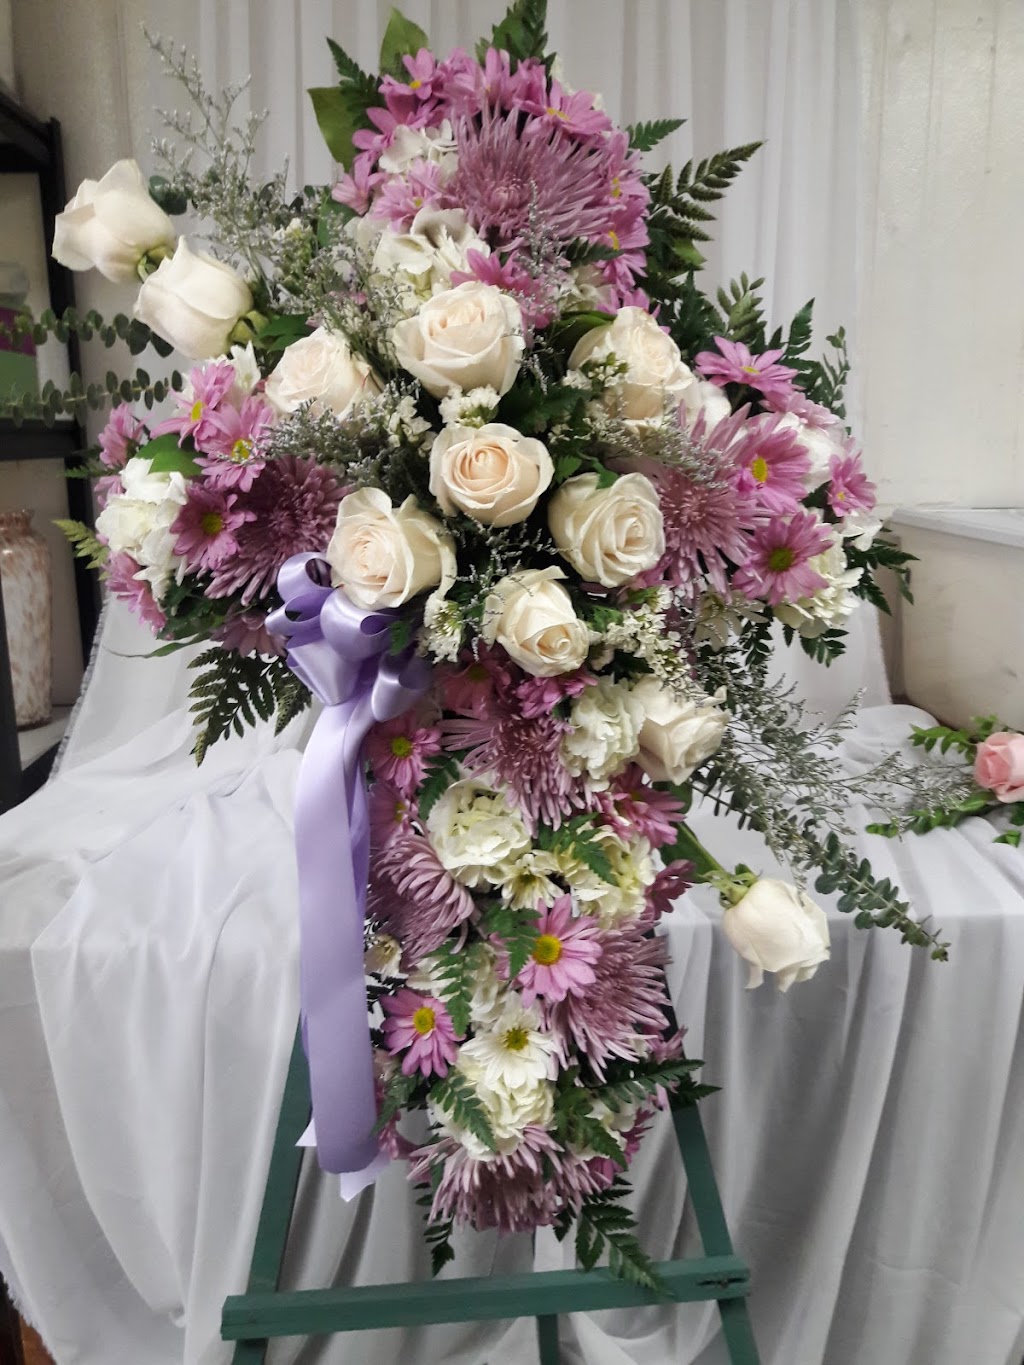 Chino Lupitas Florist and Gifts | 12345 Mountain Ave suite m, Chino, CA 91710 | Phone: (909) 591-8660